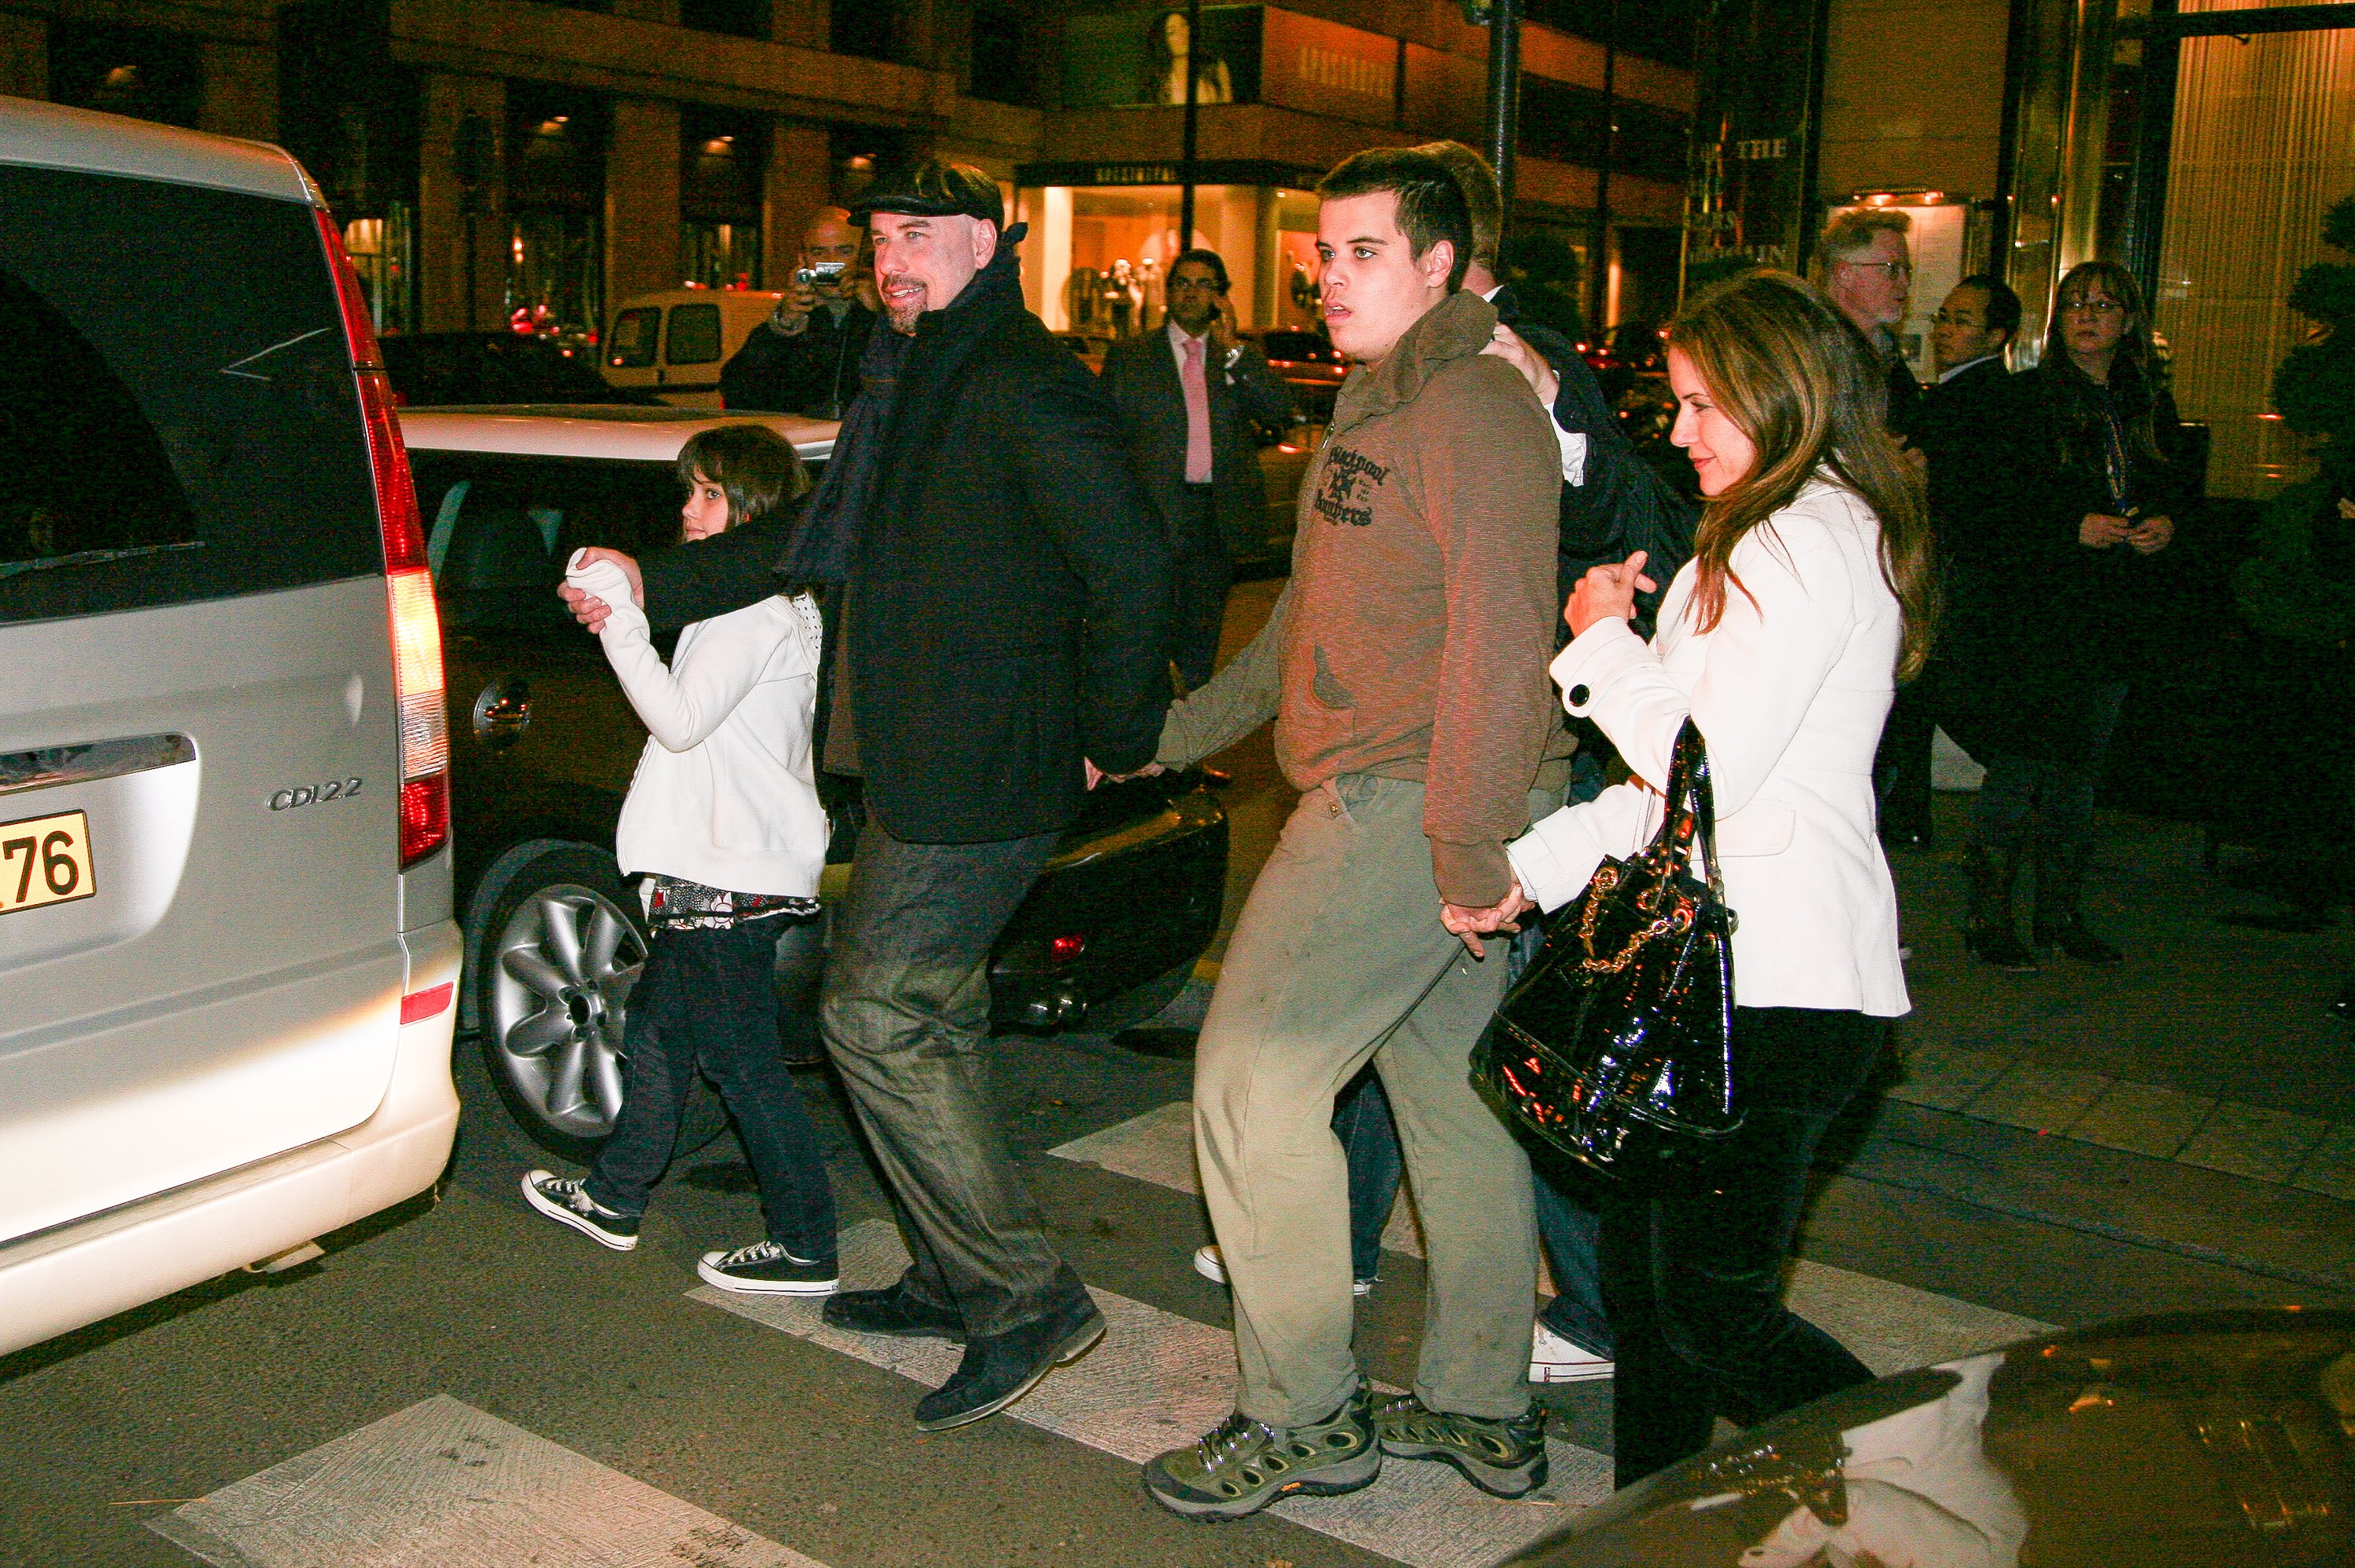 John Travolta spotted leaving the 'Relais Plaza' restaurant with his daughter Ella, his son Jett and his wife Kelly Preston on November 3, 2008 in Paris, France. | Source: Getty Images